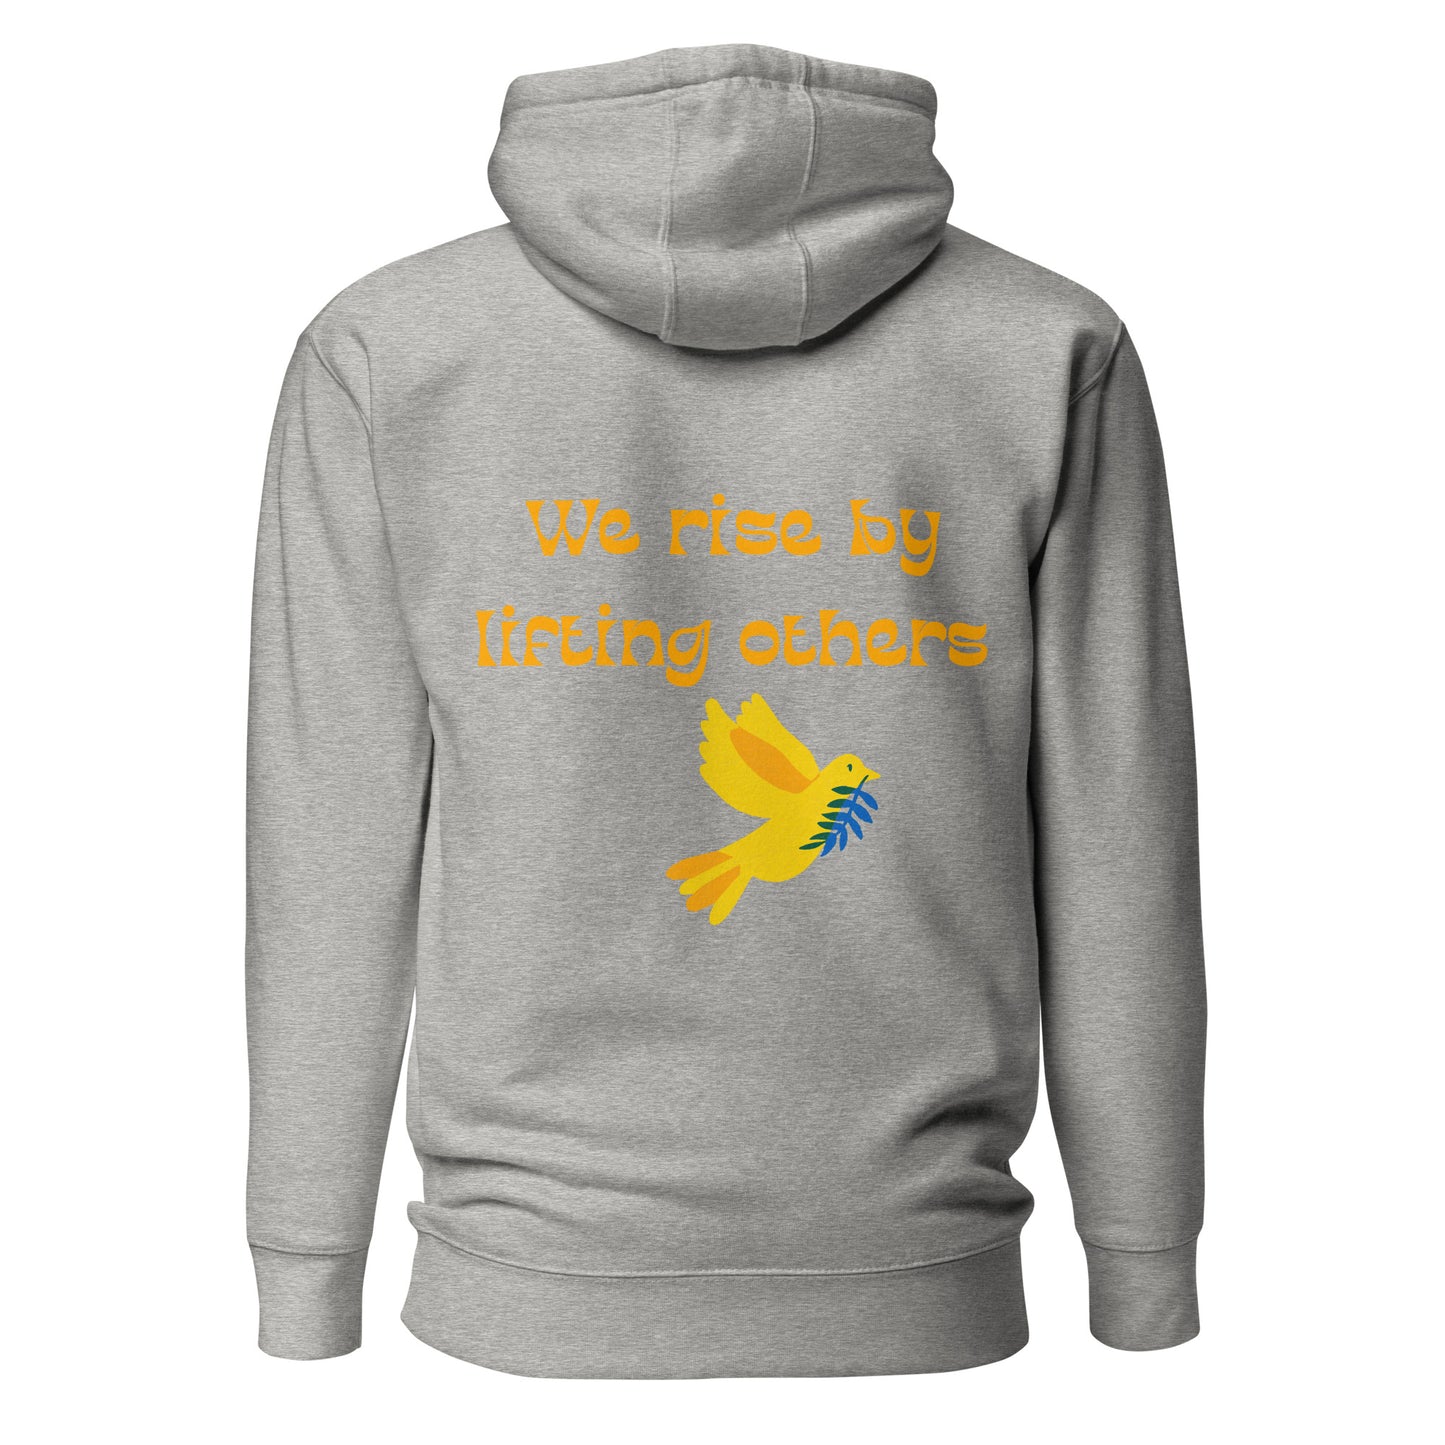 We Rise By Lifting Others Unisex Hoodie